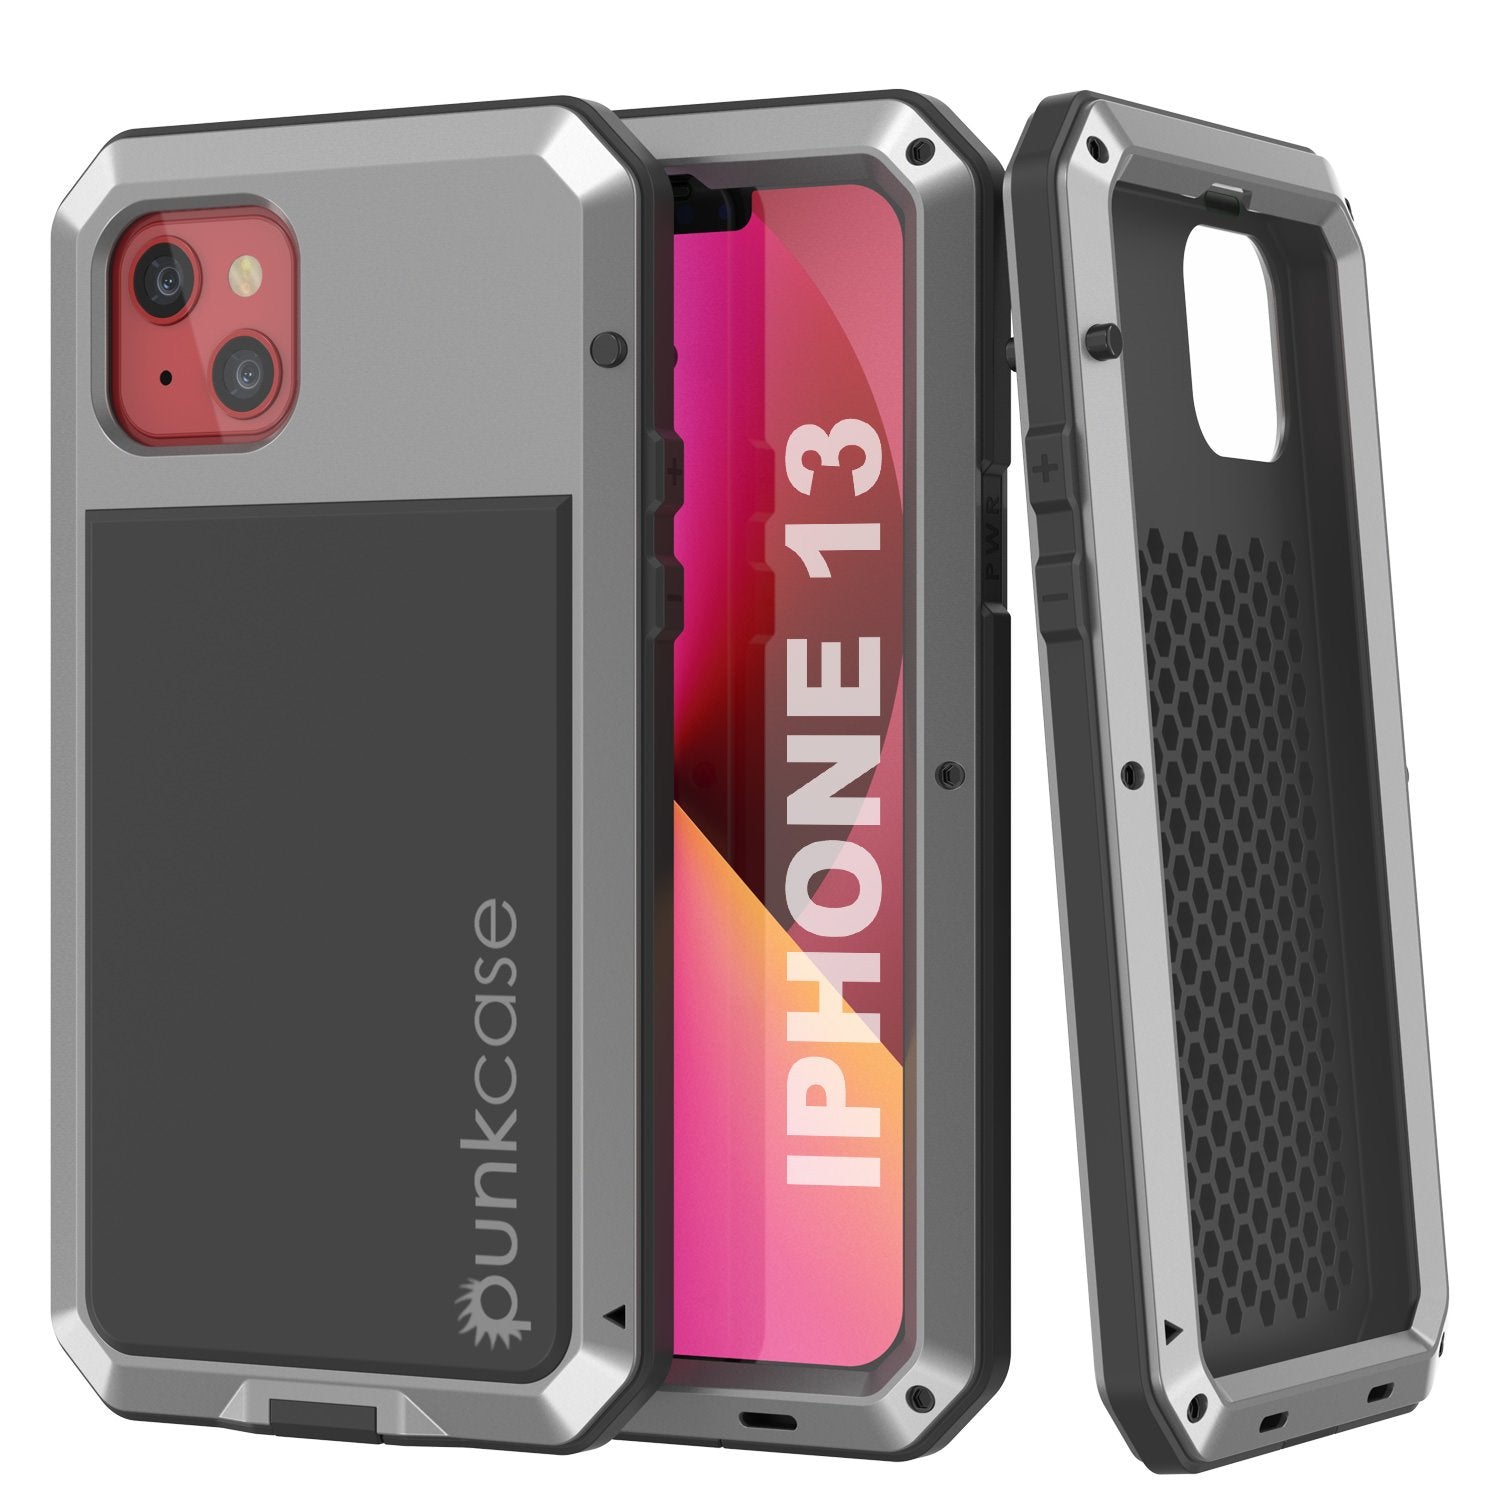 iPhone 13 Metal Case, Heavy Duty Military Grade Armor Cover [shock proof] Full Body Hard [Silver] (Color in image: Silver)